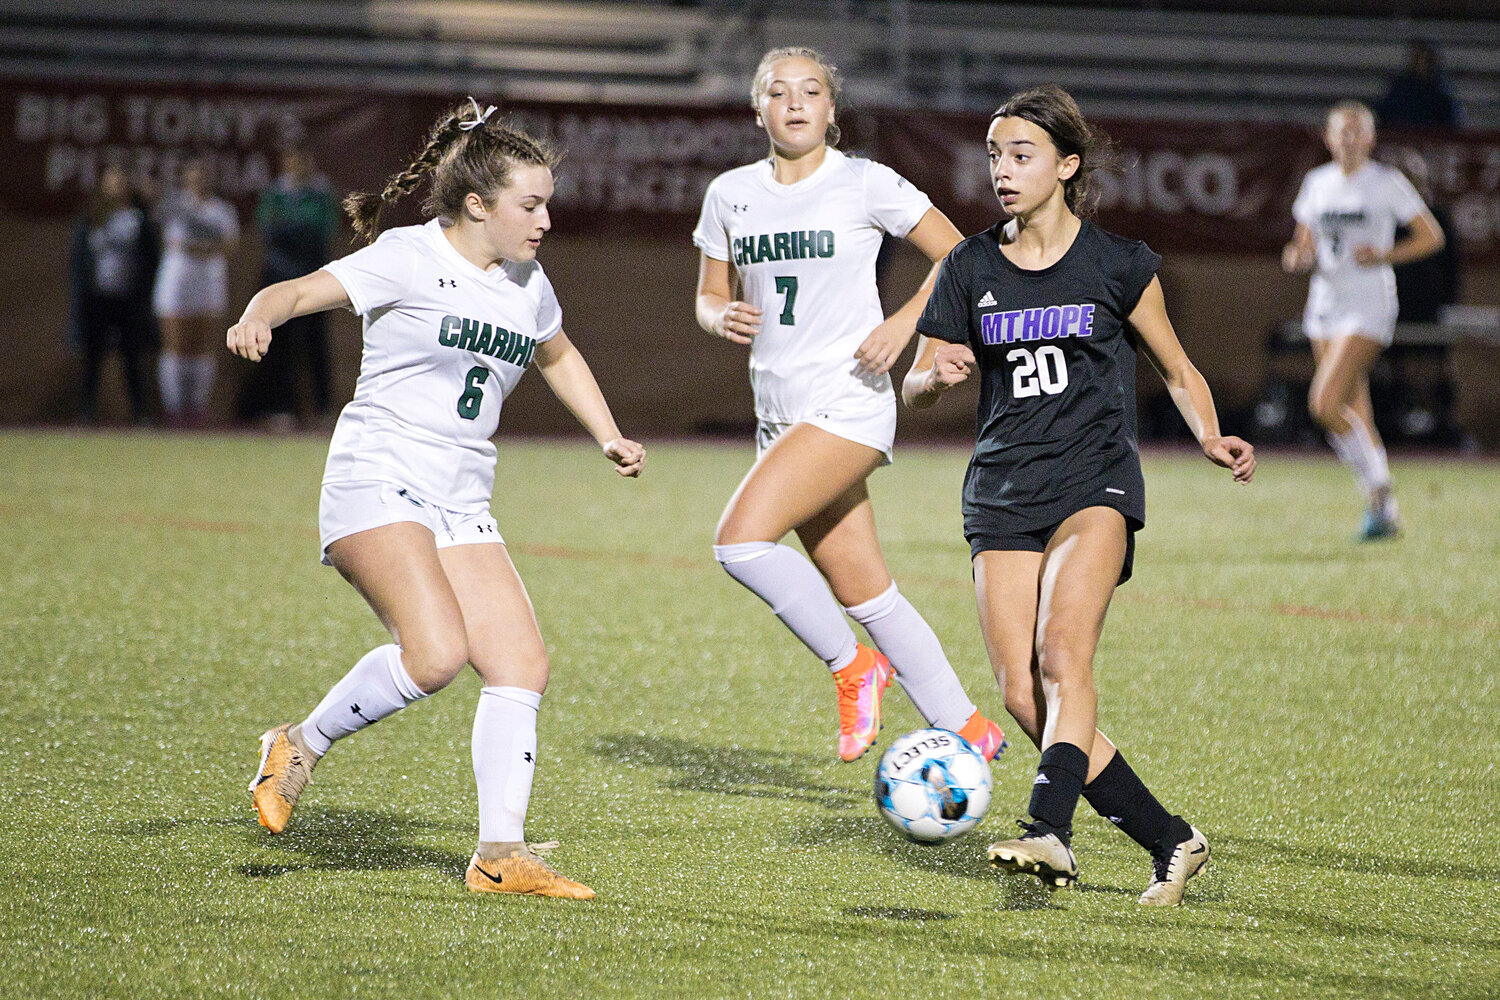 Thea Jackson looks for an open teammate as Chariho defenders close in.